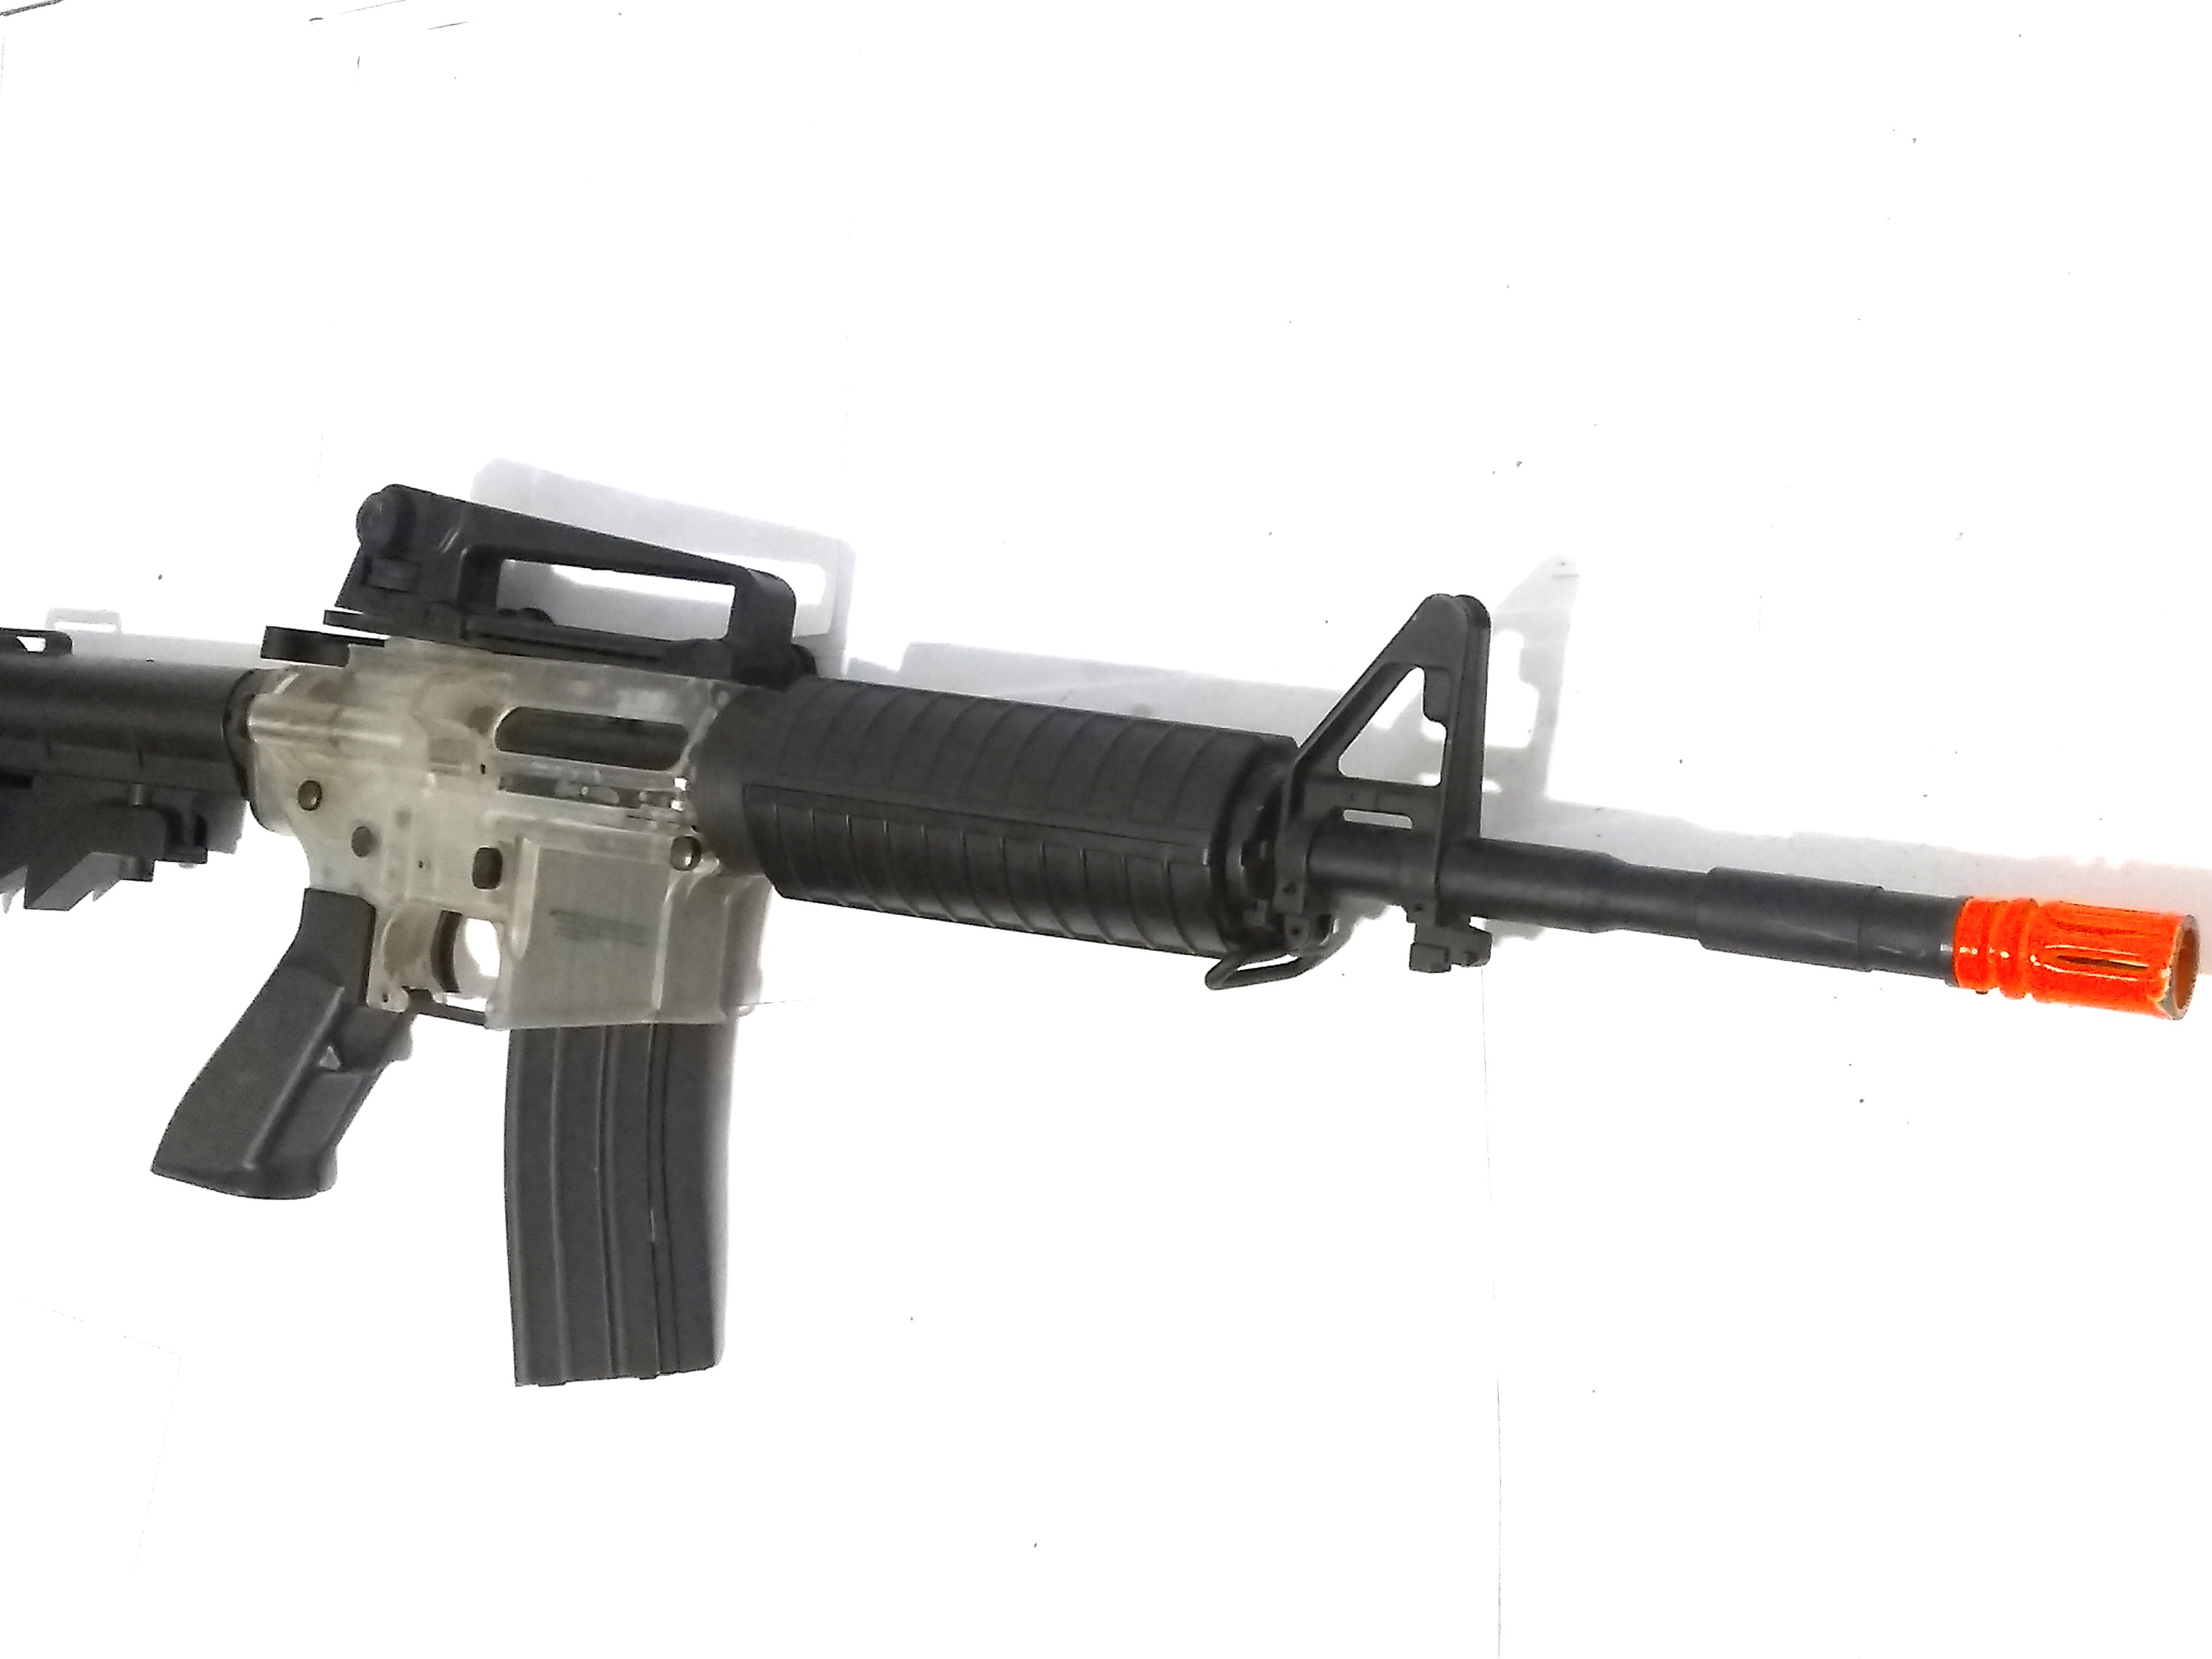 Aftermath Kirenex Police Airsoft Rifle, Clear